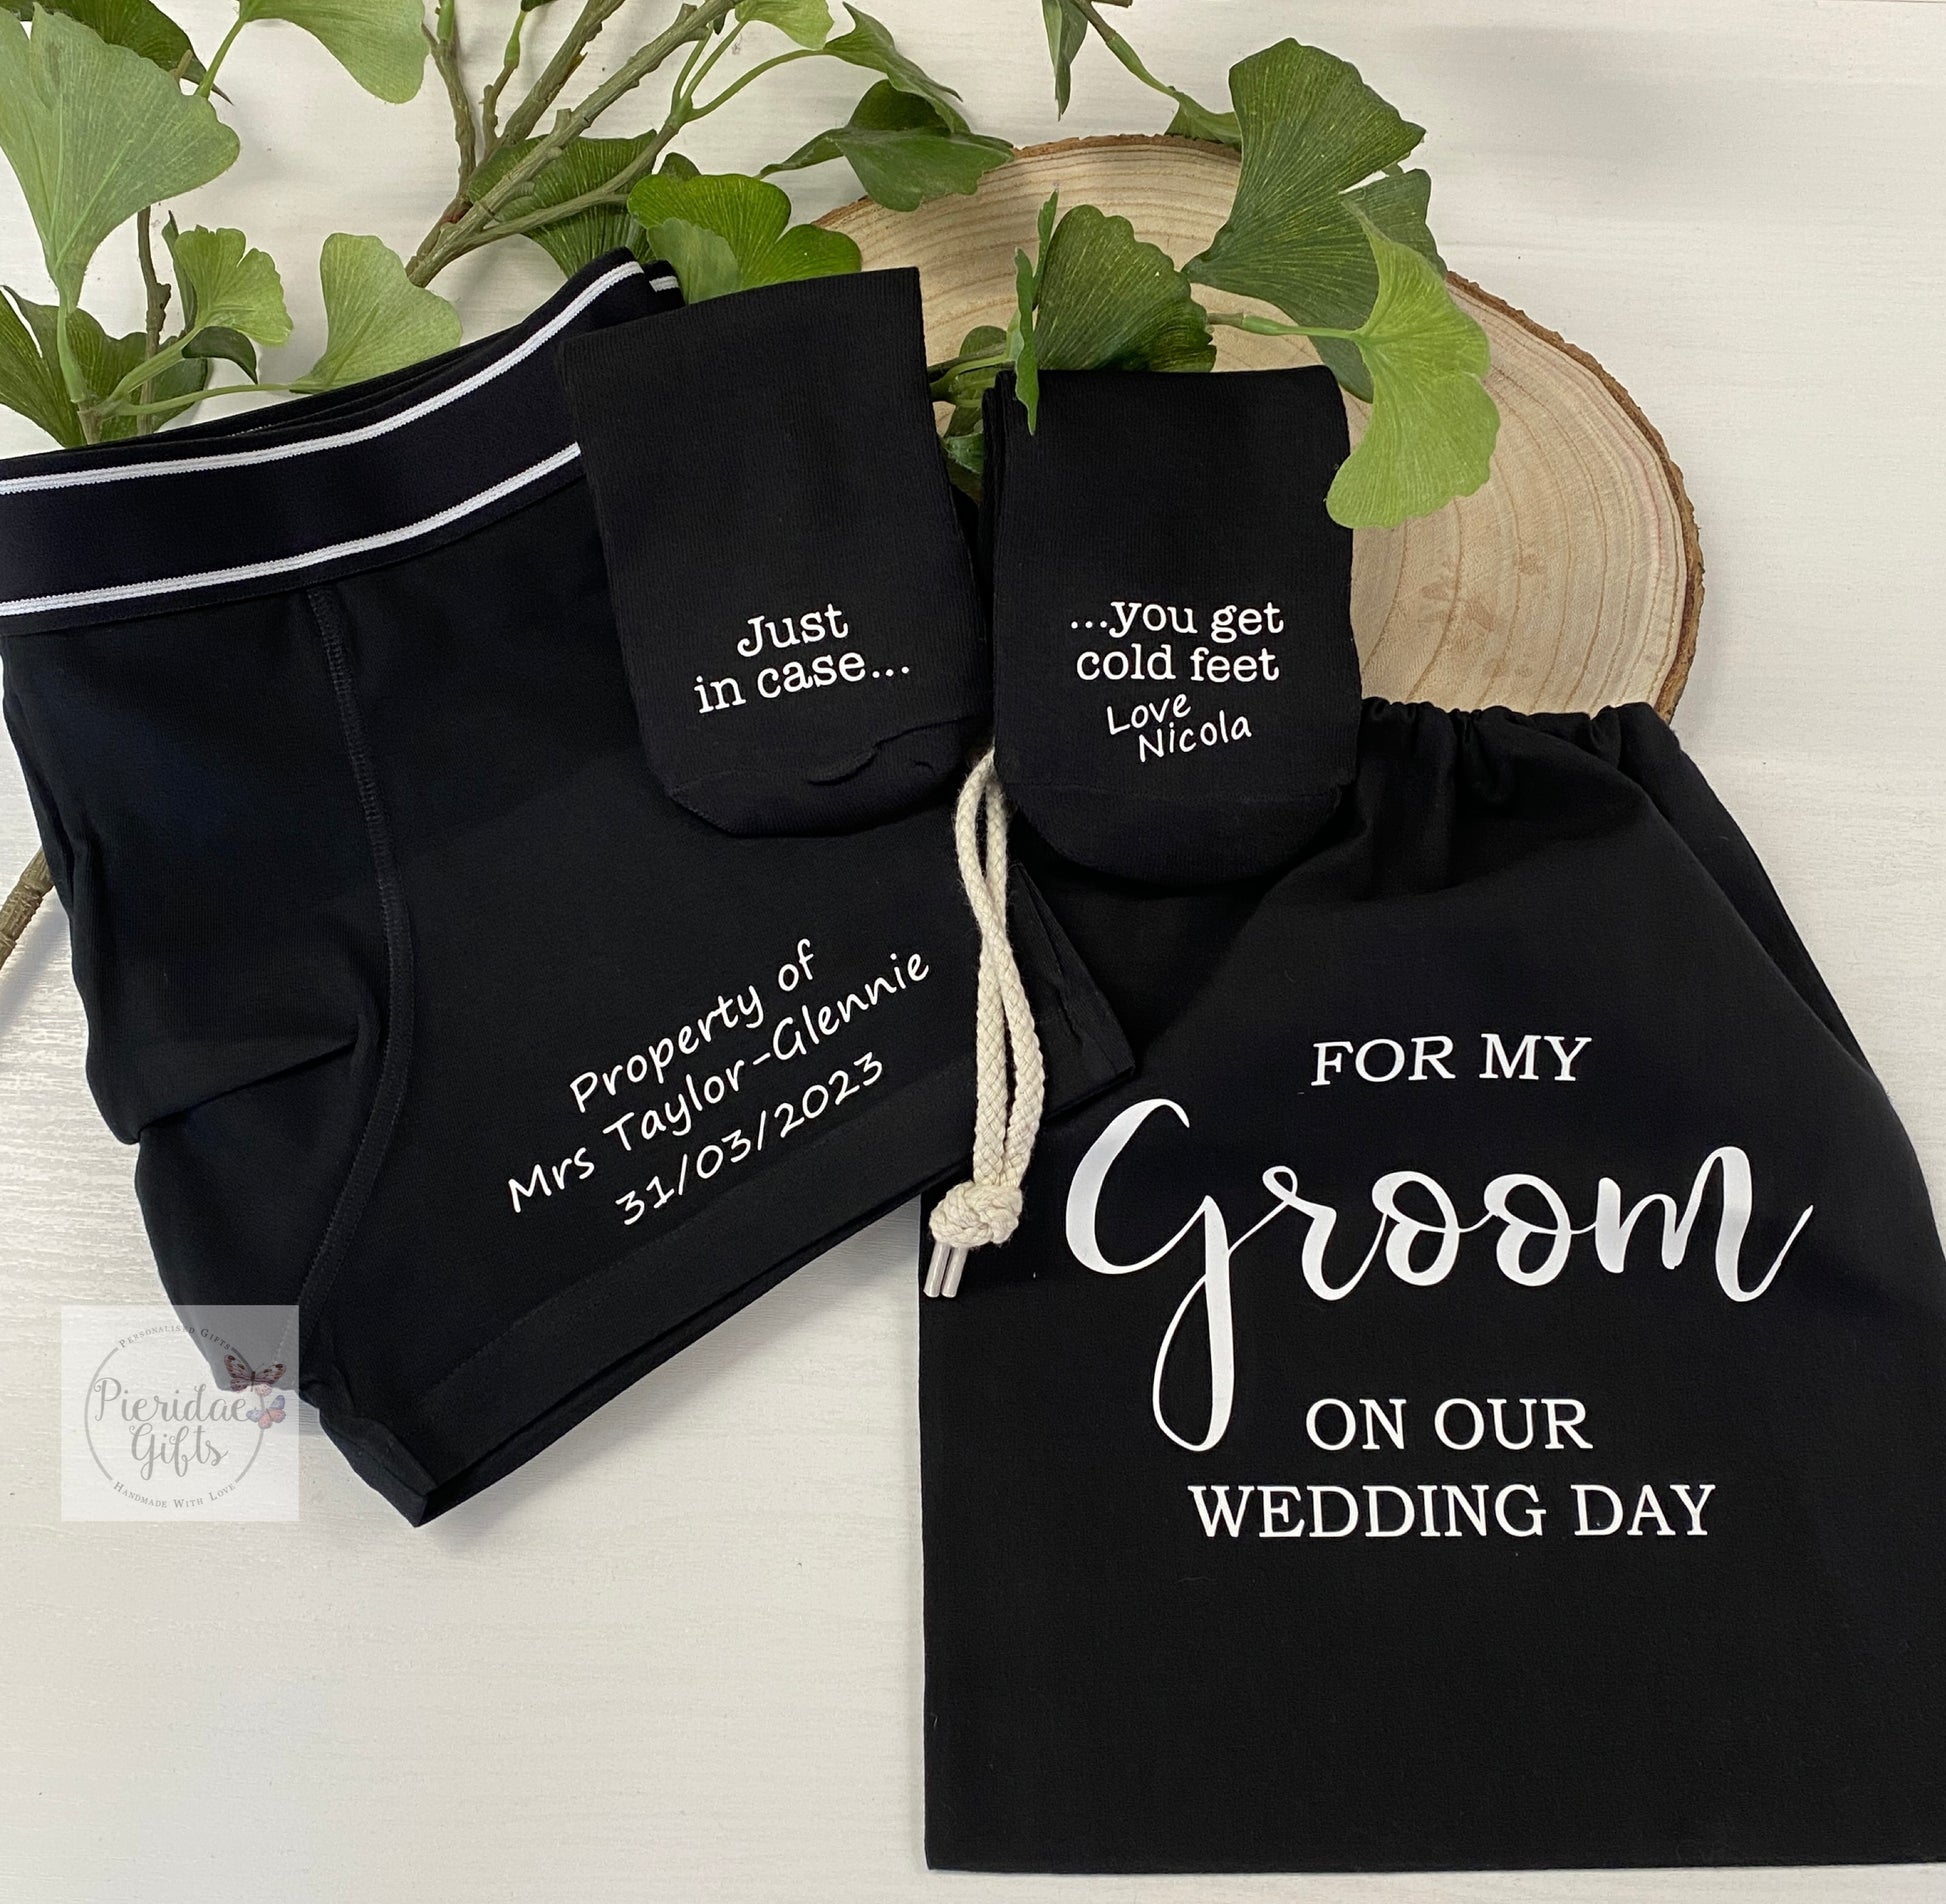 Groom Wedding Boxers,Personalised Boxers With Date Gift For Groom